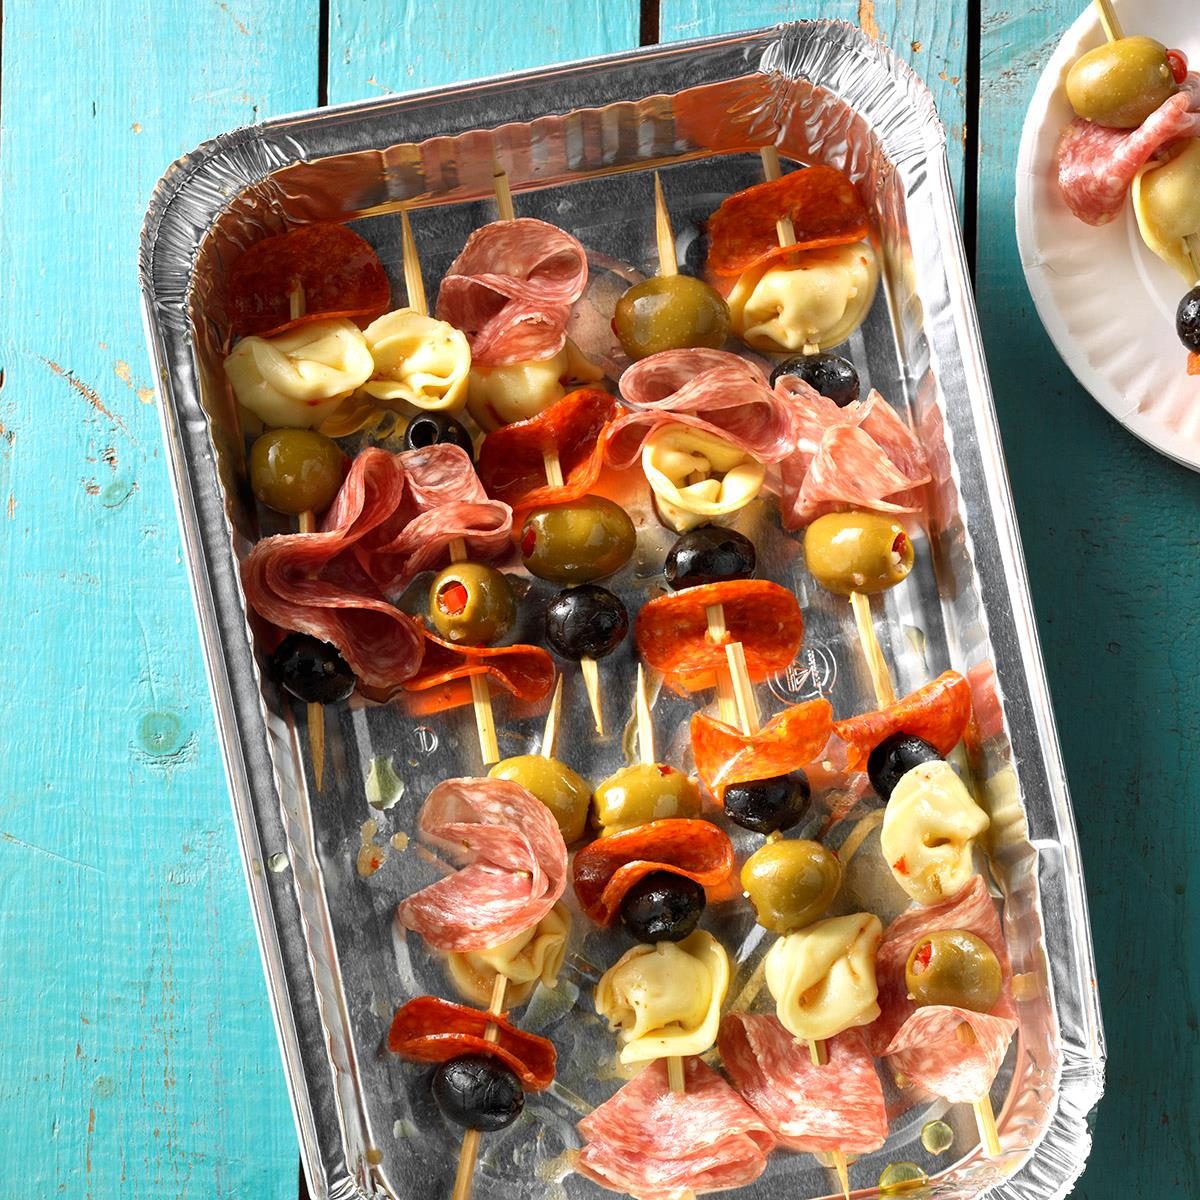 15+ EASY Hors d'oeuvre Ideas Your Party Needs! - Aleka's Get-Together